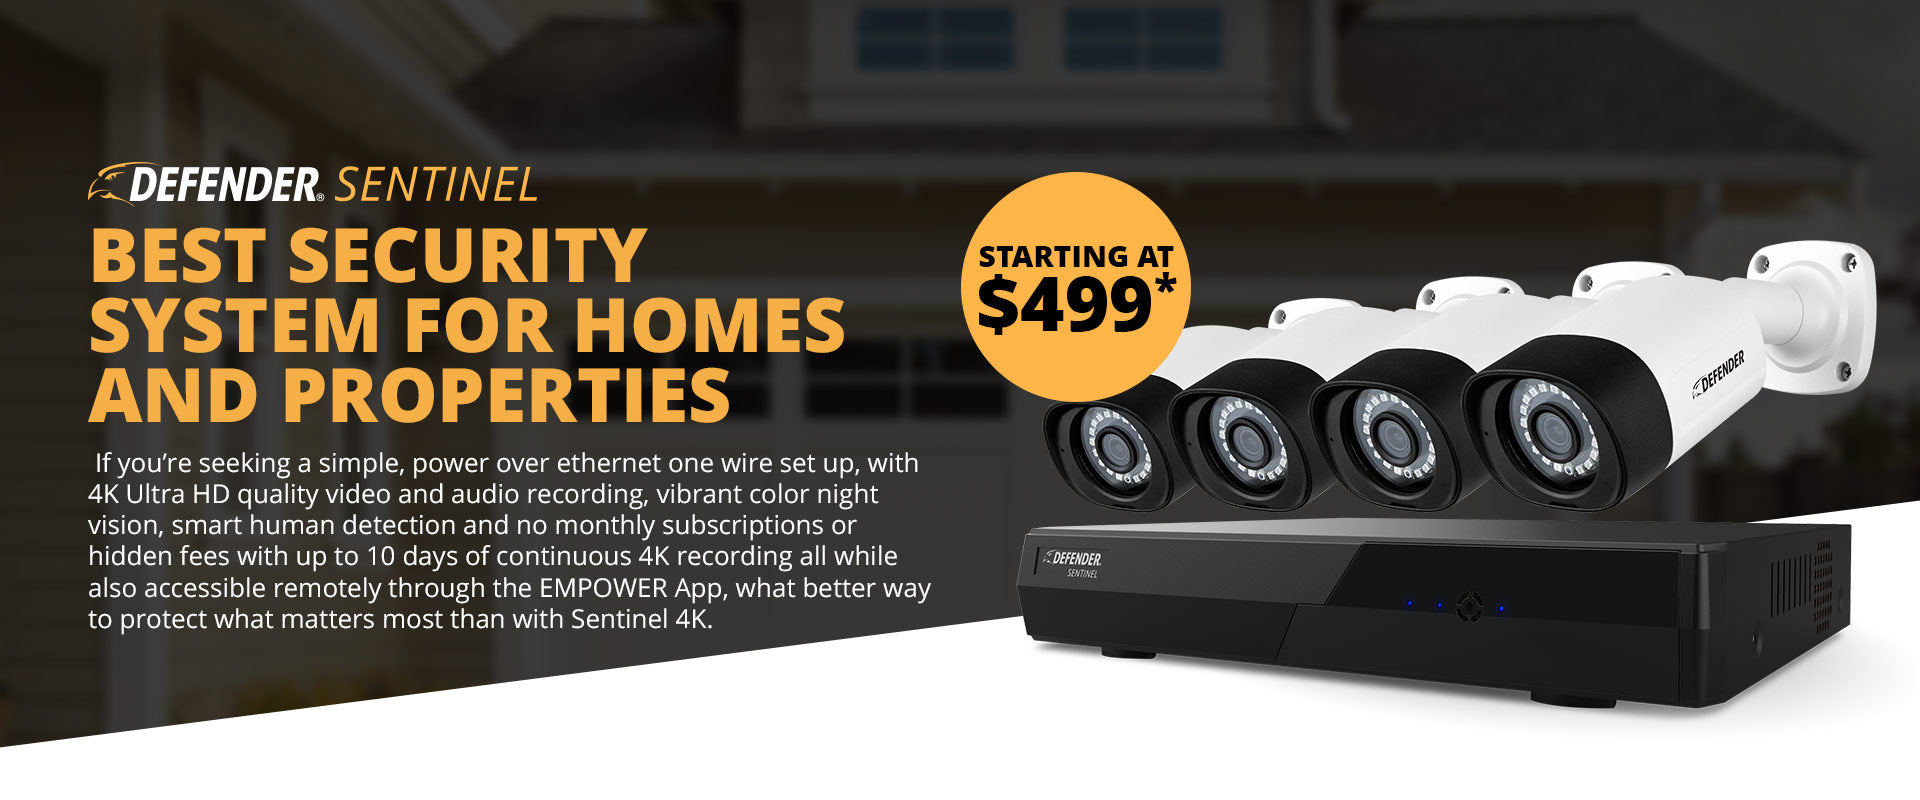 Color Night Vision, Smart Human Detection, Free Storage, IP66 Weather Rated, 15 FPS Live View, No Monthly Fees, 1TB Built-In HDD, and Premium App for Mobile Viewing.